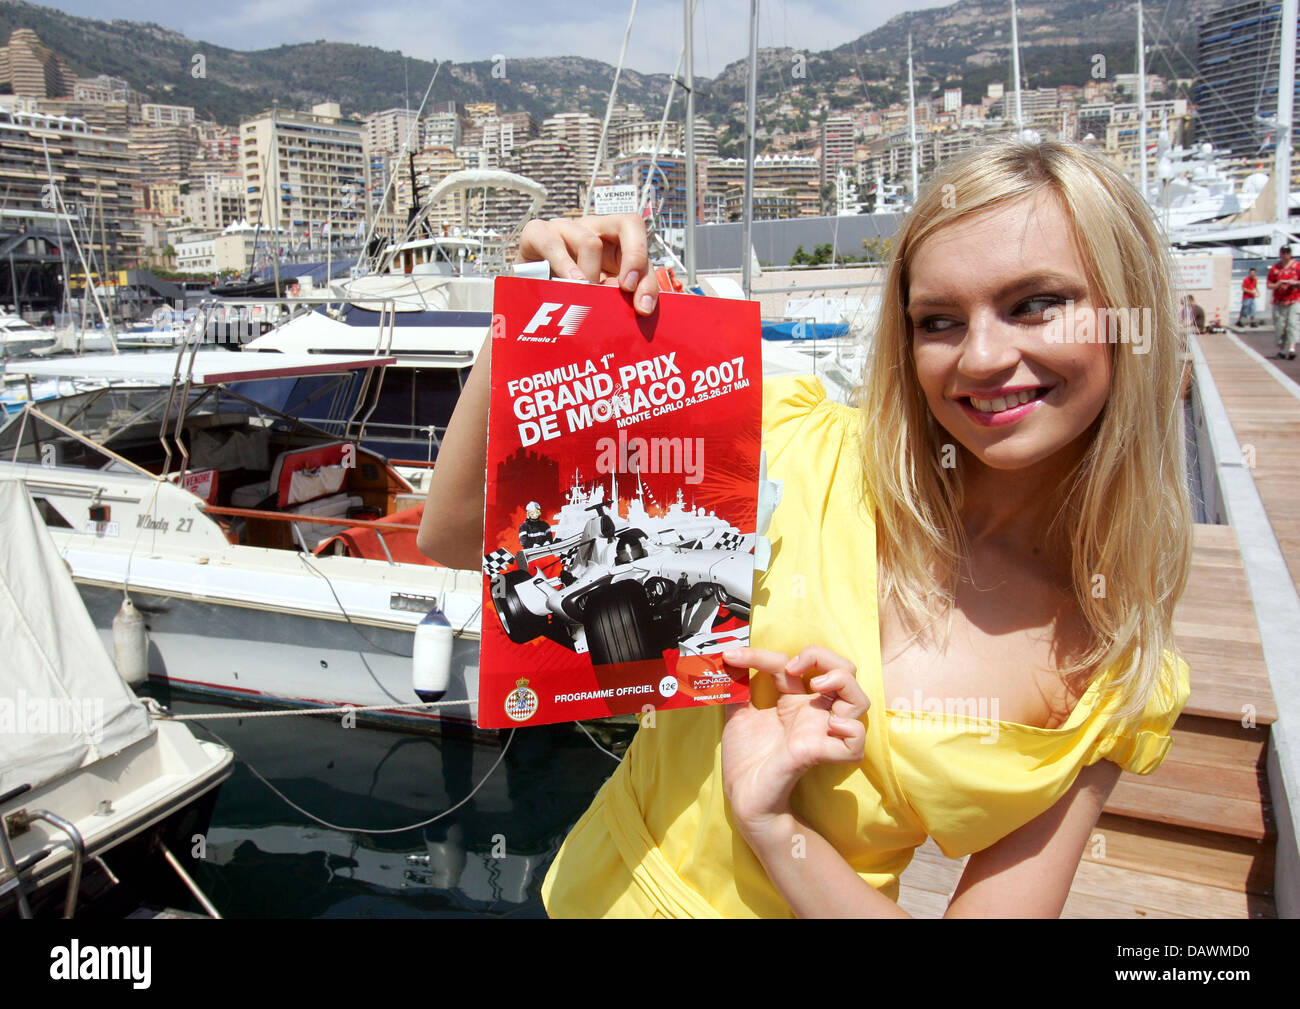 A model presents a race programme in front of the harbour in Monte Carlo, Monaco, Wednesday, 23 May 2007. The Monaco Grand Prix takes place on Sunday, 27 May 2007. Photo: GERO BRELOER Stock Photo